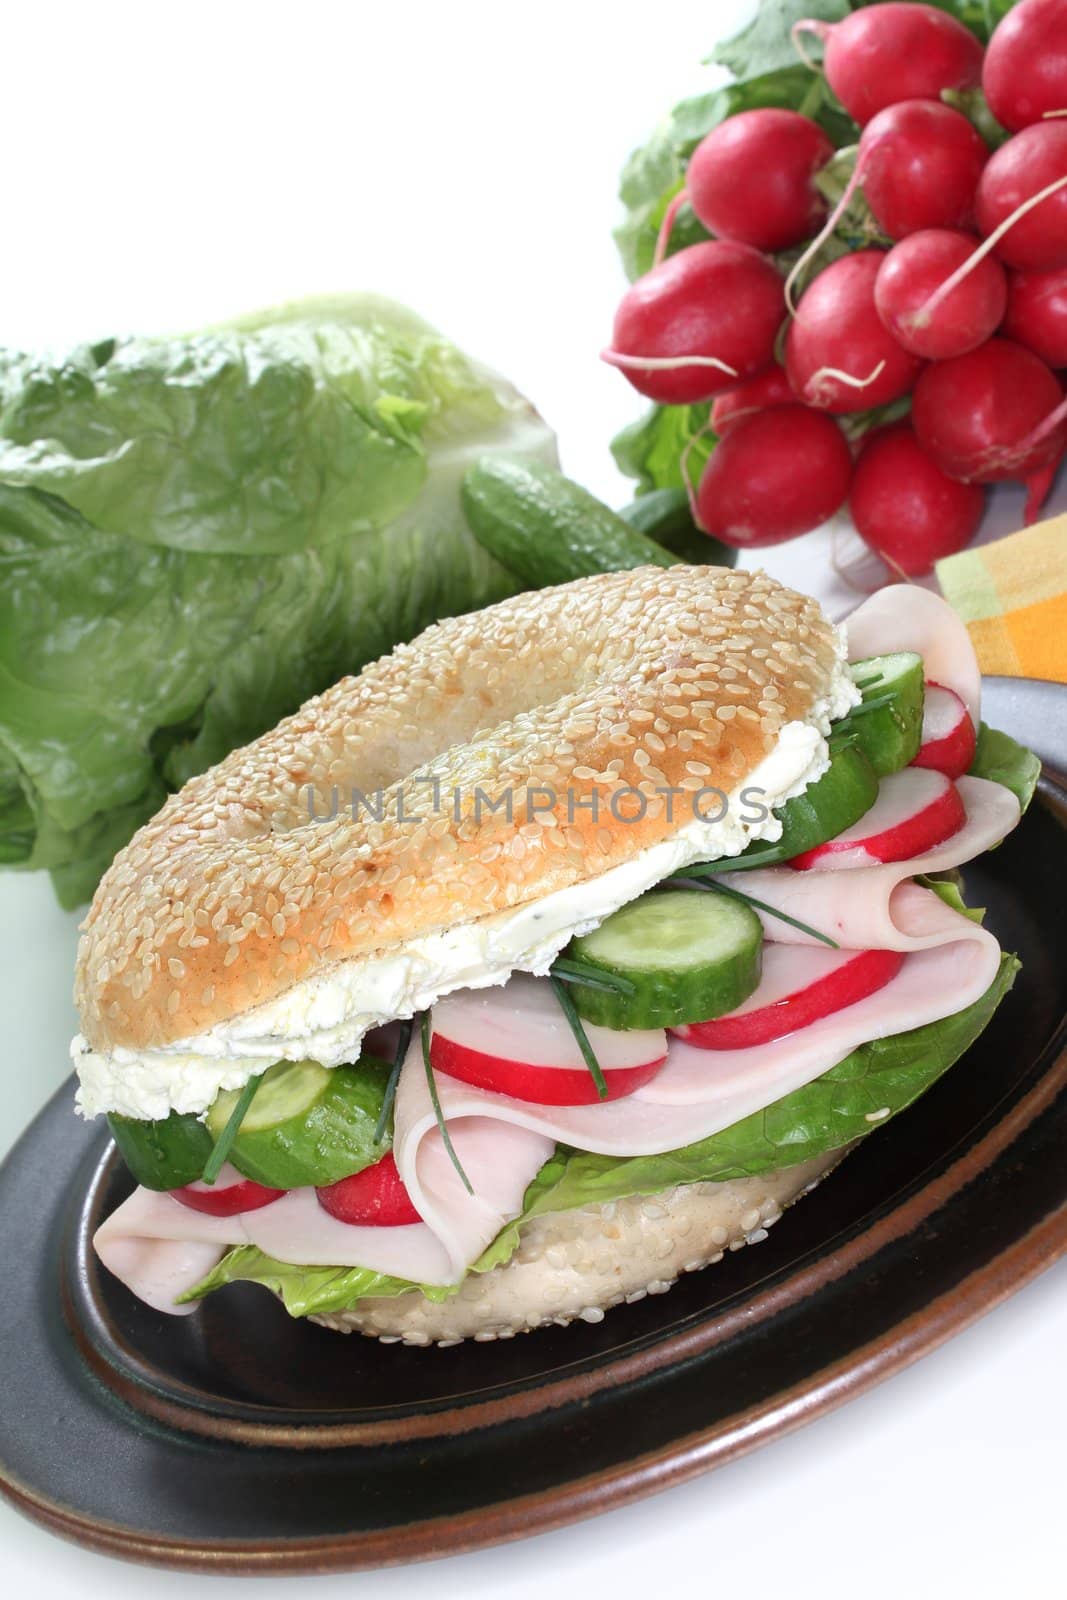 Bagel topped with a breast of turkey, radishes and cucumber

